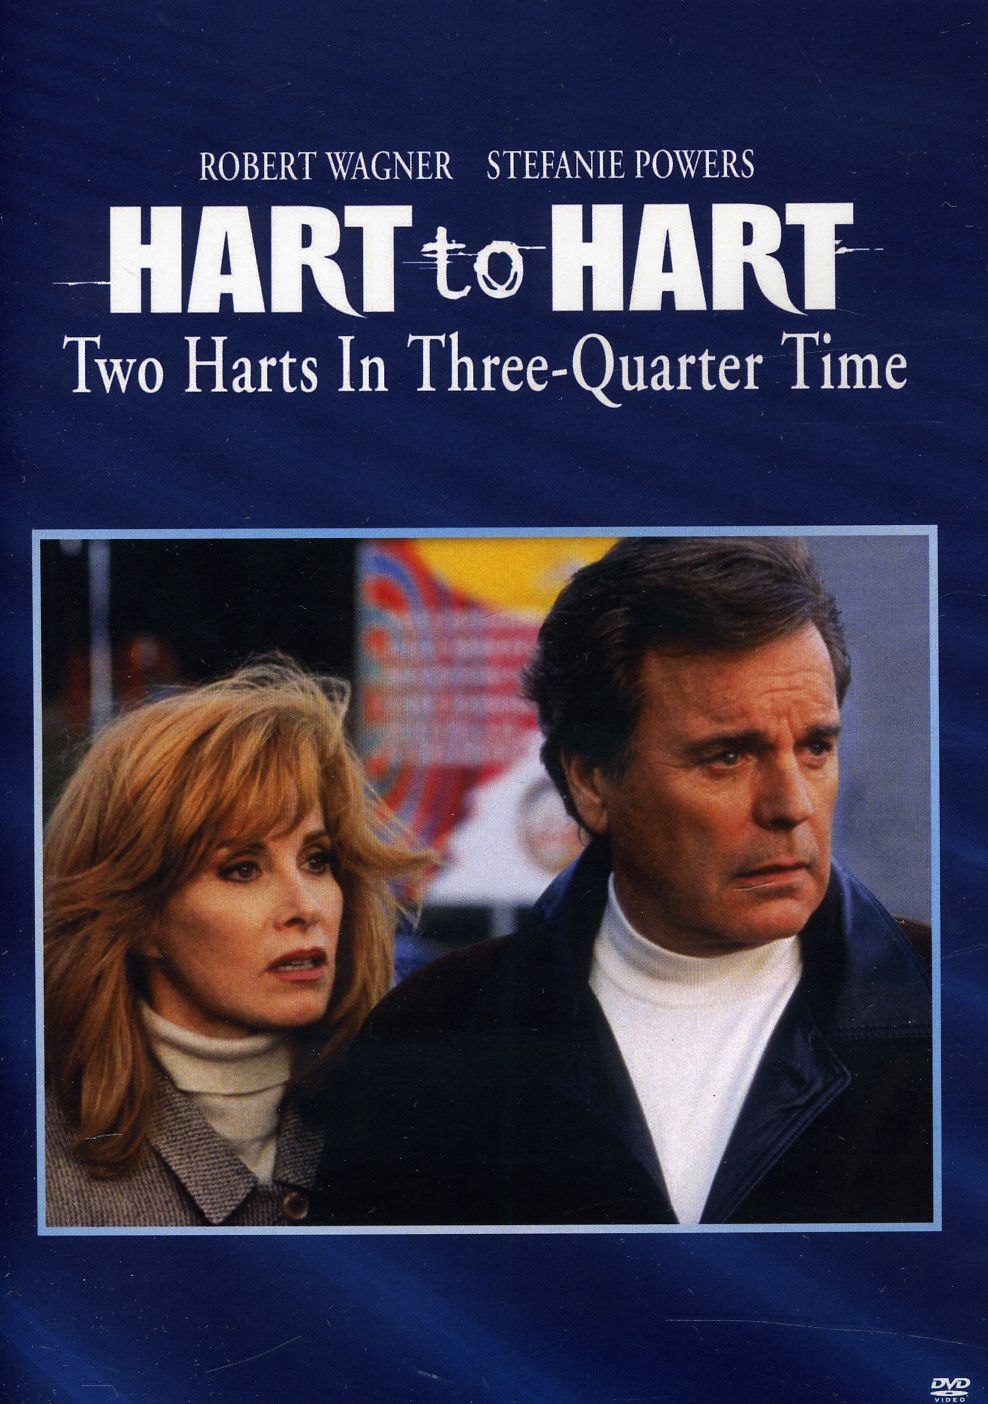 HART TO HART: TWO HARTS IN THREE QUARTER TIME